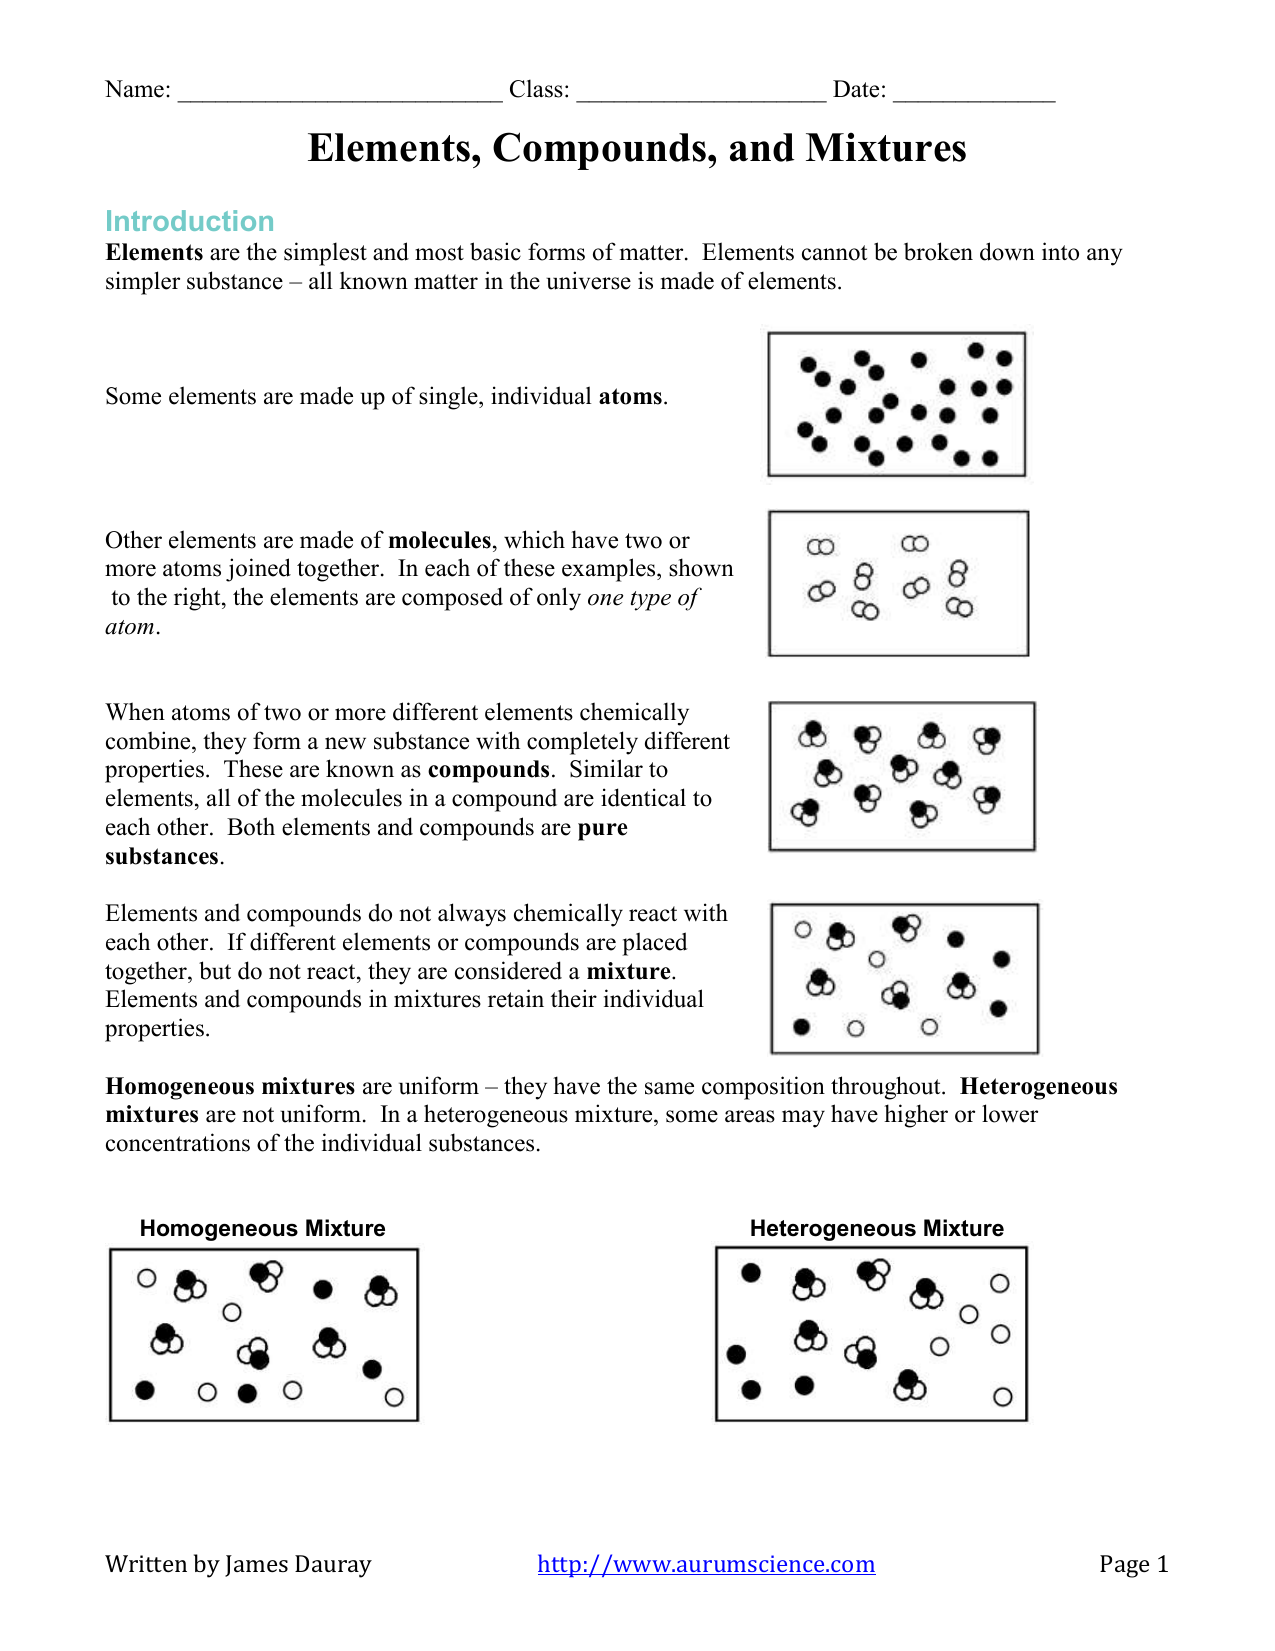 physical-science-elements-compounds-and-mixtures-worksheet